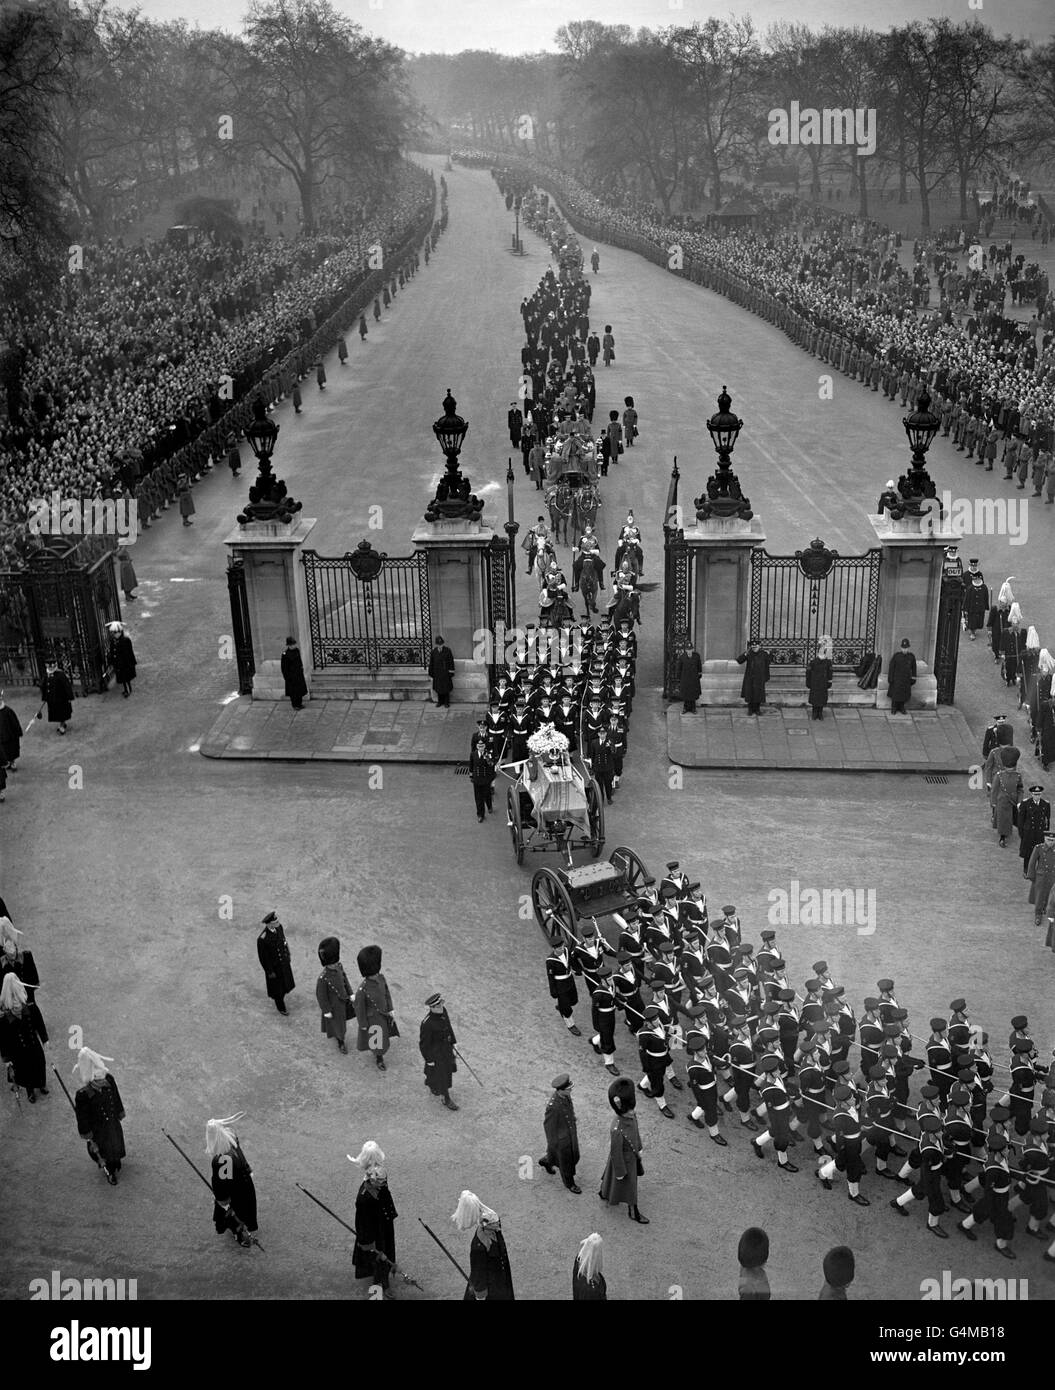 The funeral cortege of King George VI passing through the Royal Gate as it emerges from the East Carriage Drive to cross Marble Arch and enter Edgware Road. Stock Photo